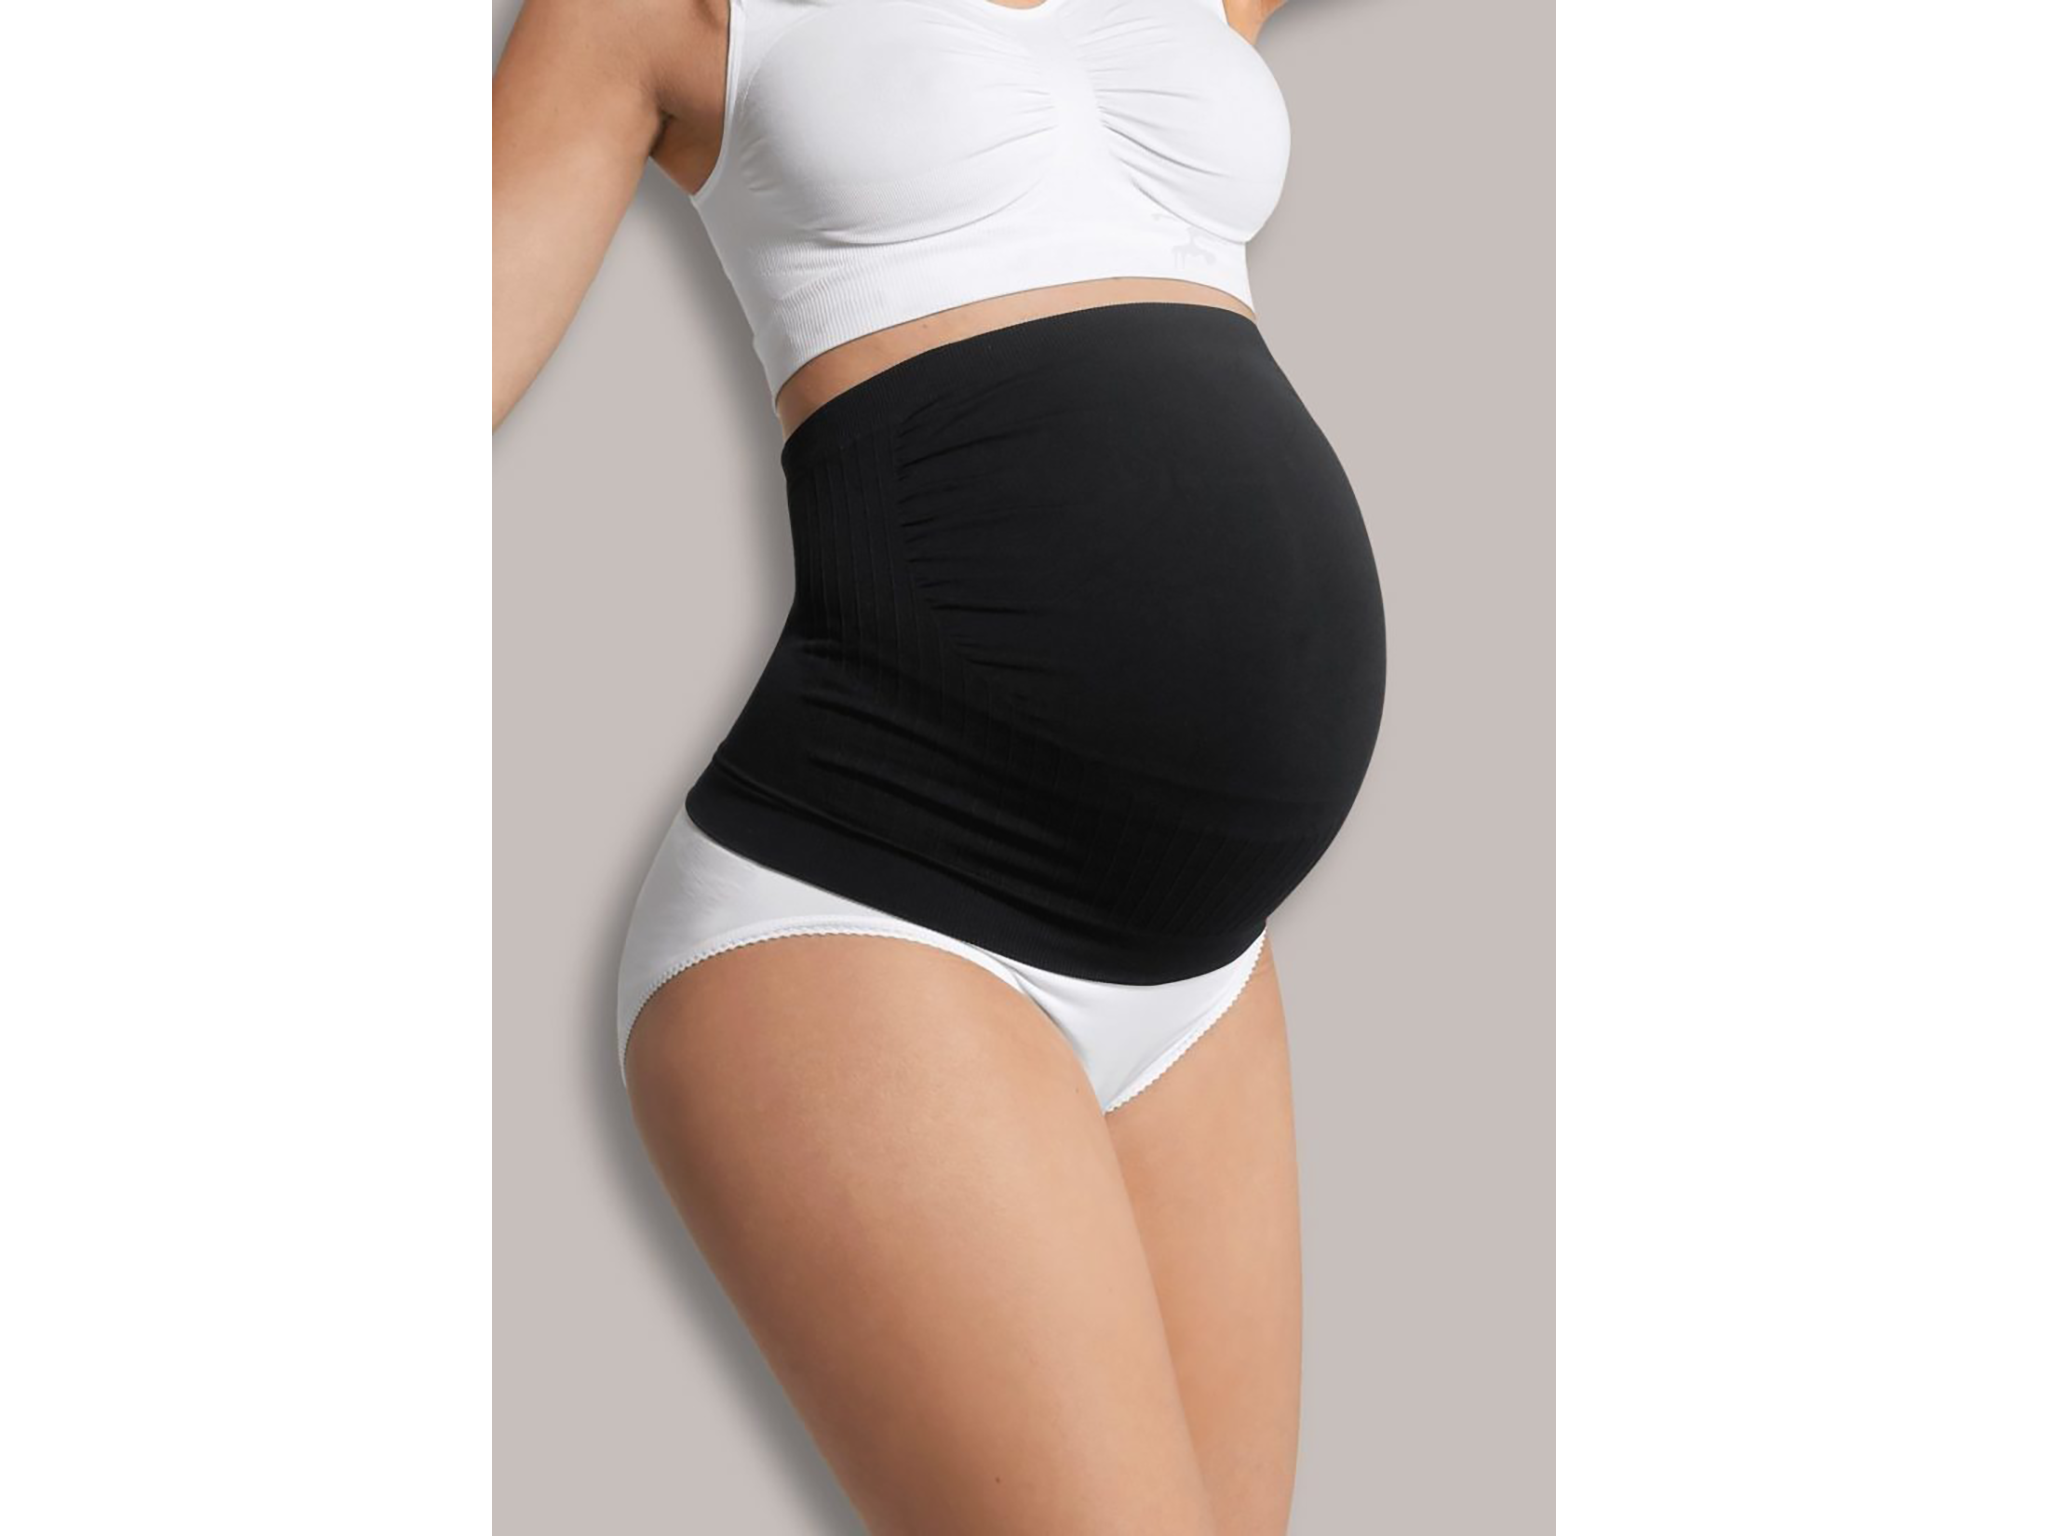 MommaWrap Pregnancy Belt, Maternity Belly Band - Pregnancy Must-Have for  Abdominal, Pelvic, Waist, and Back Support - Vysta Health